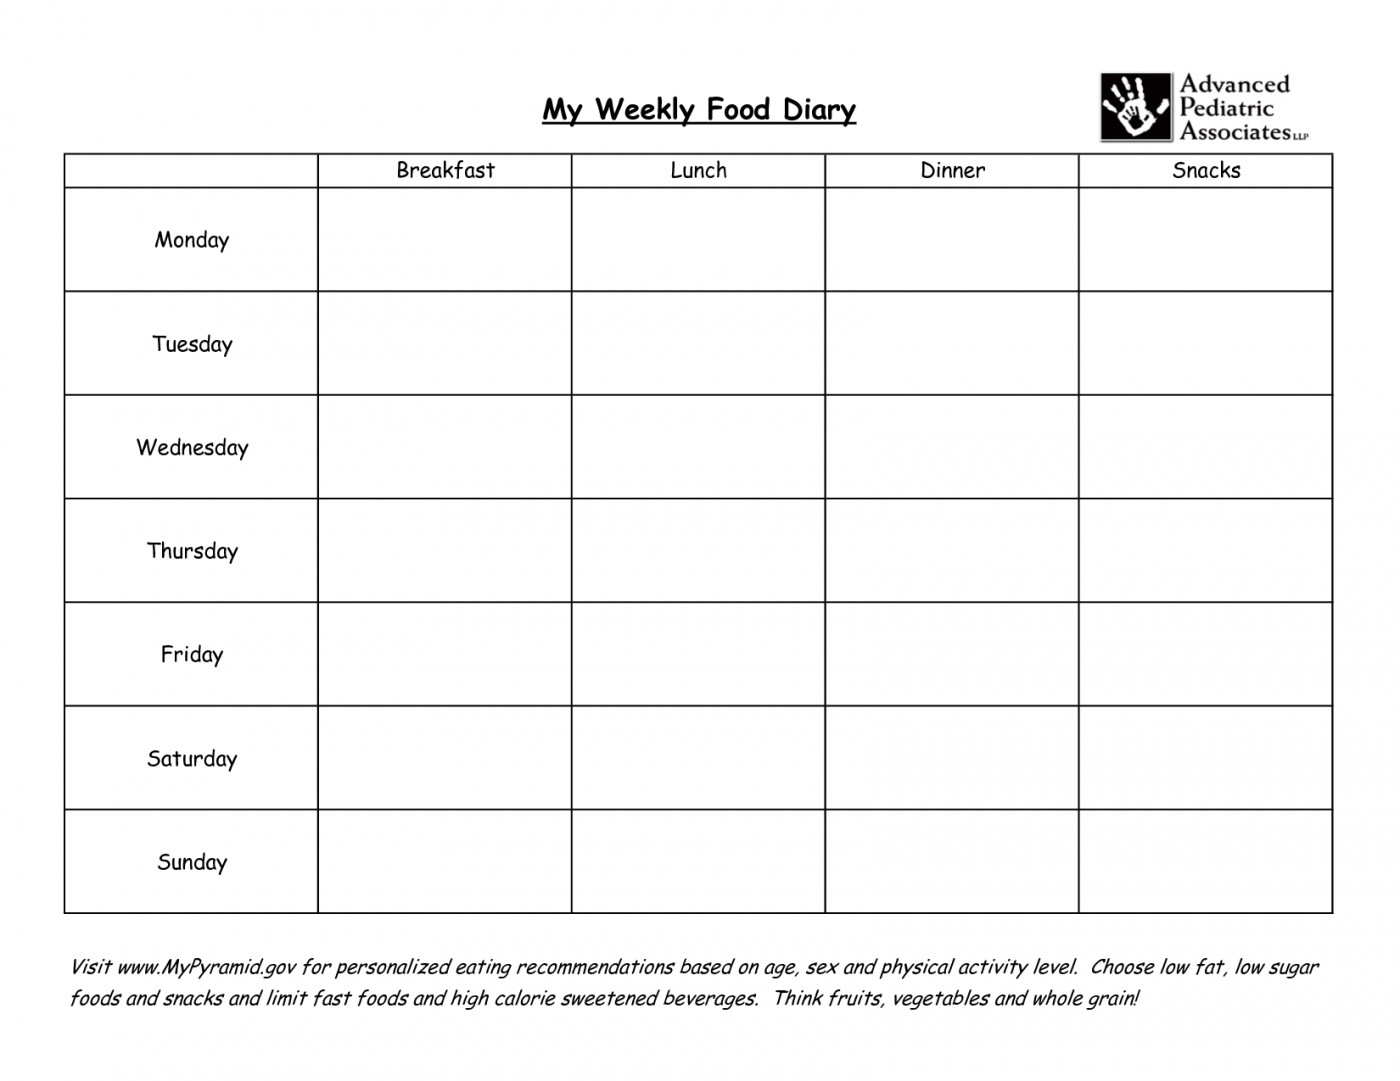 Slimming World Food Diary Spreadsheet Intended For 011 Template Ideas Food Diary Excel Beautiful Printable Weekly Mini